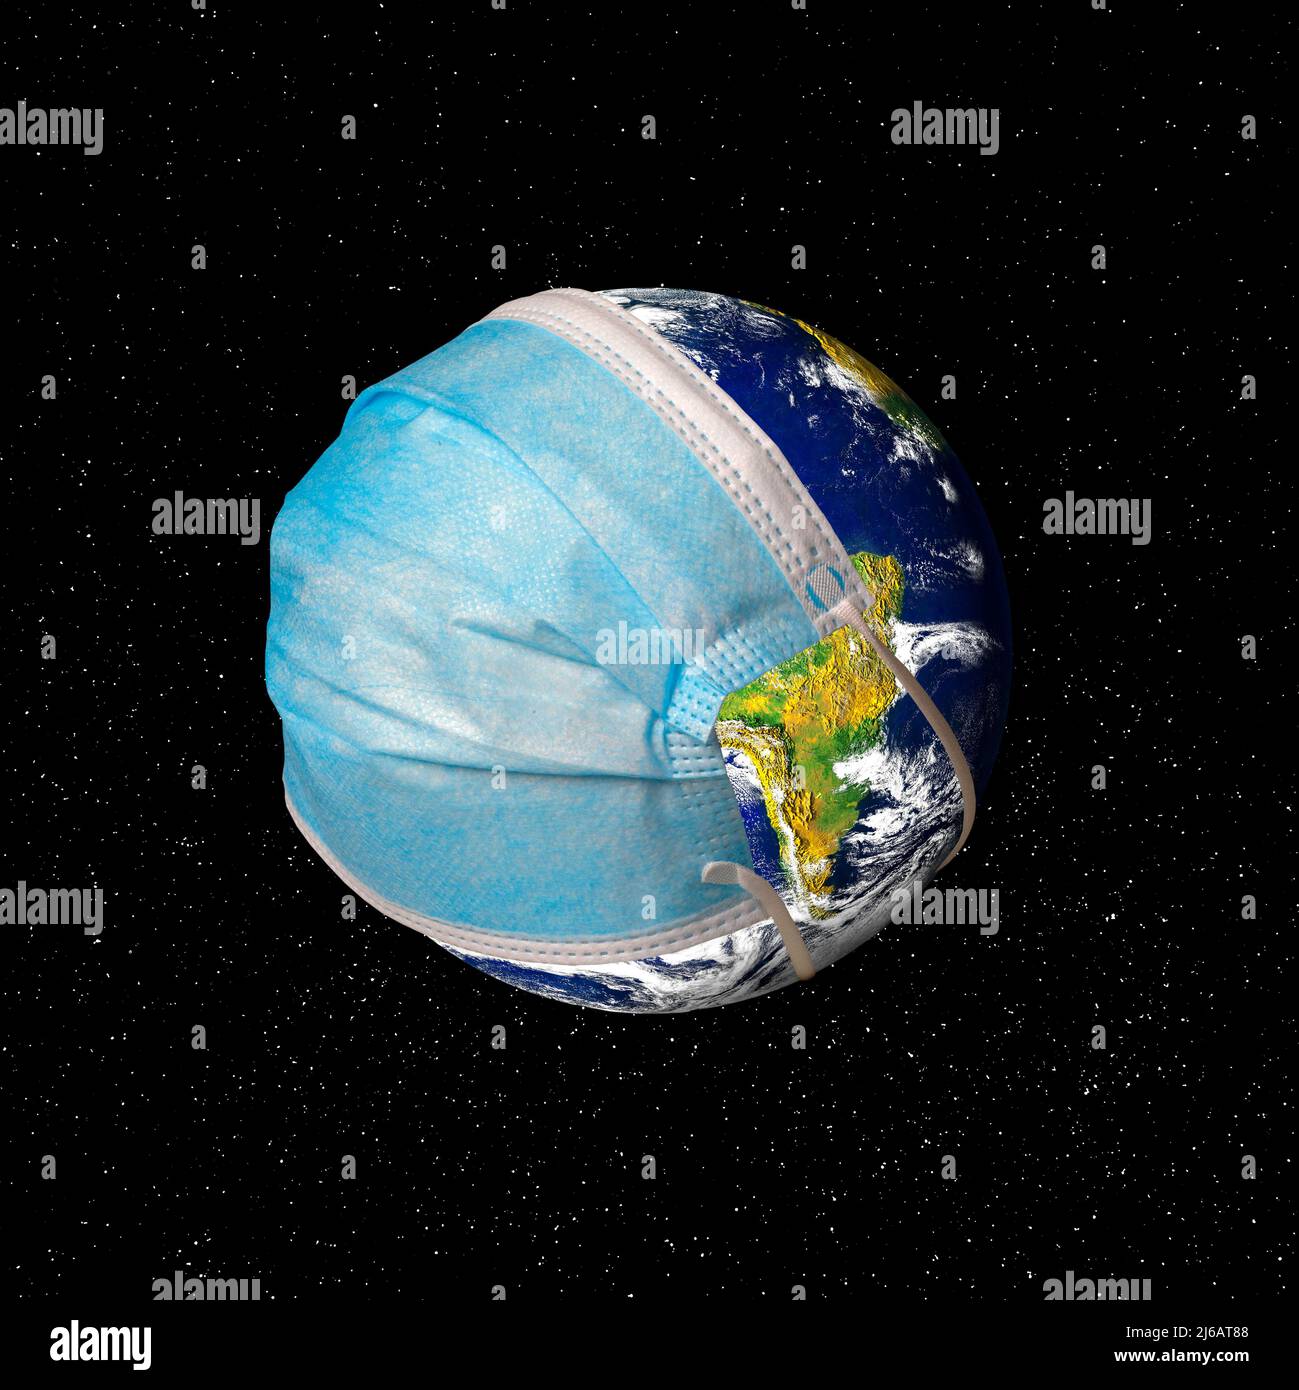 Earth with a face mask, conceptual image Stock Photo